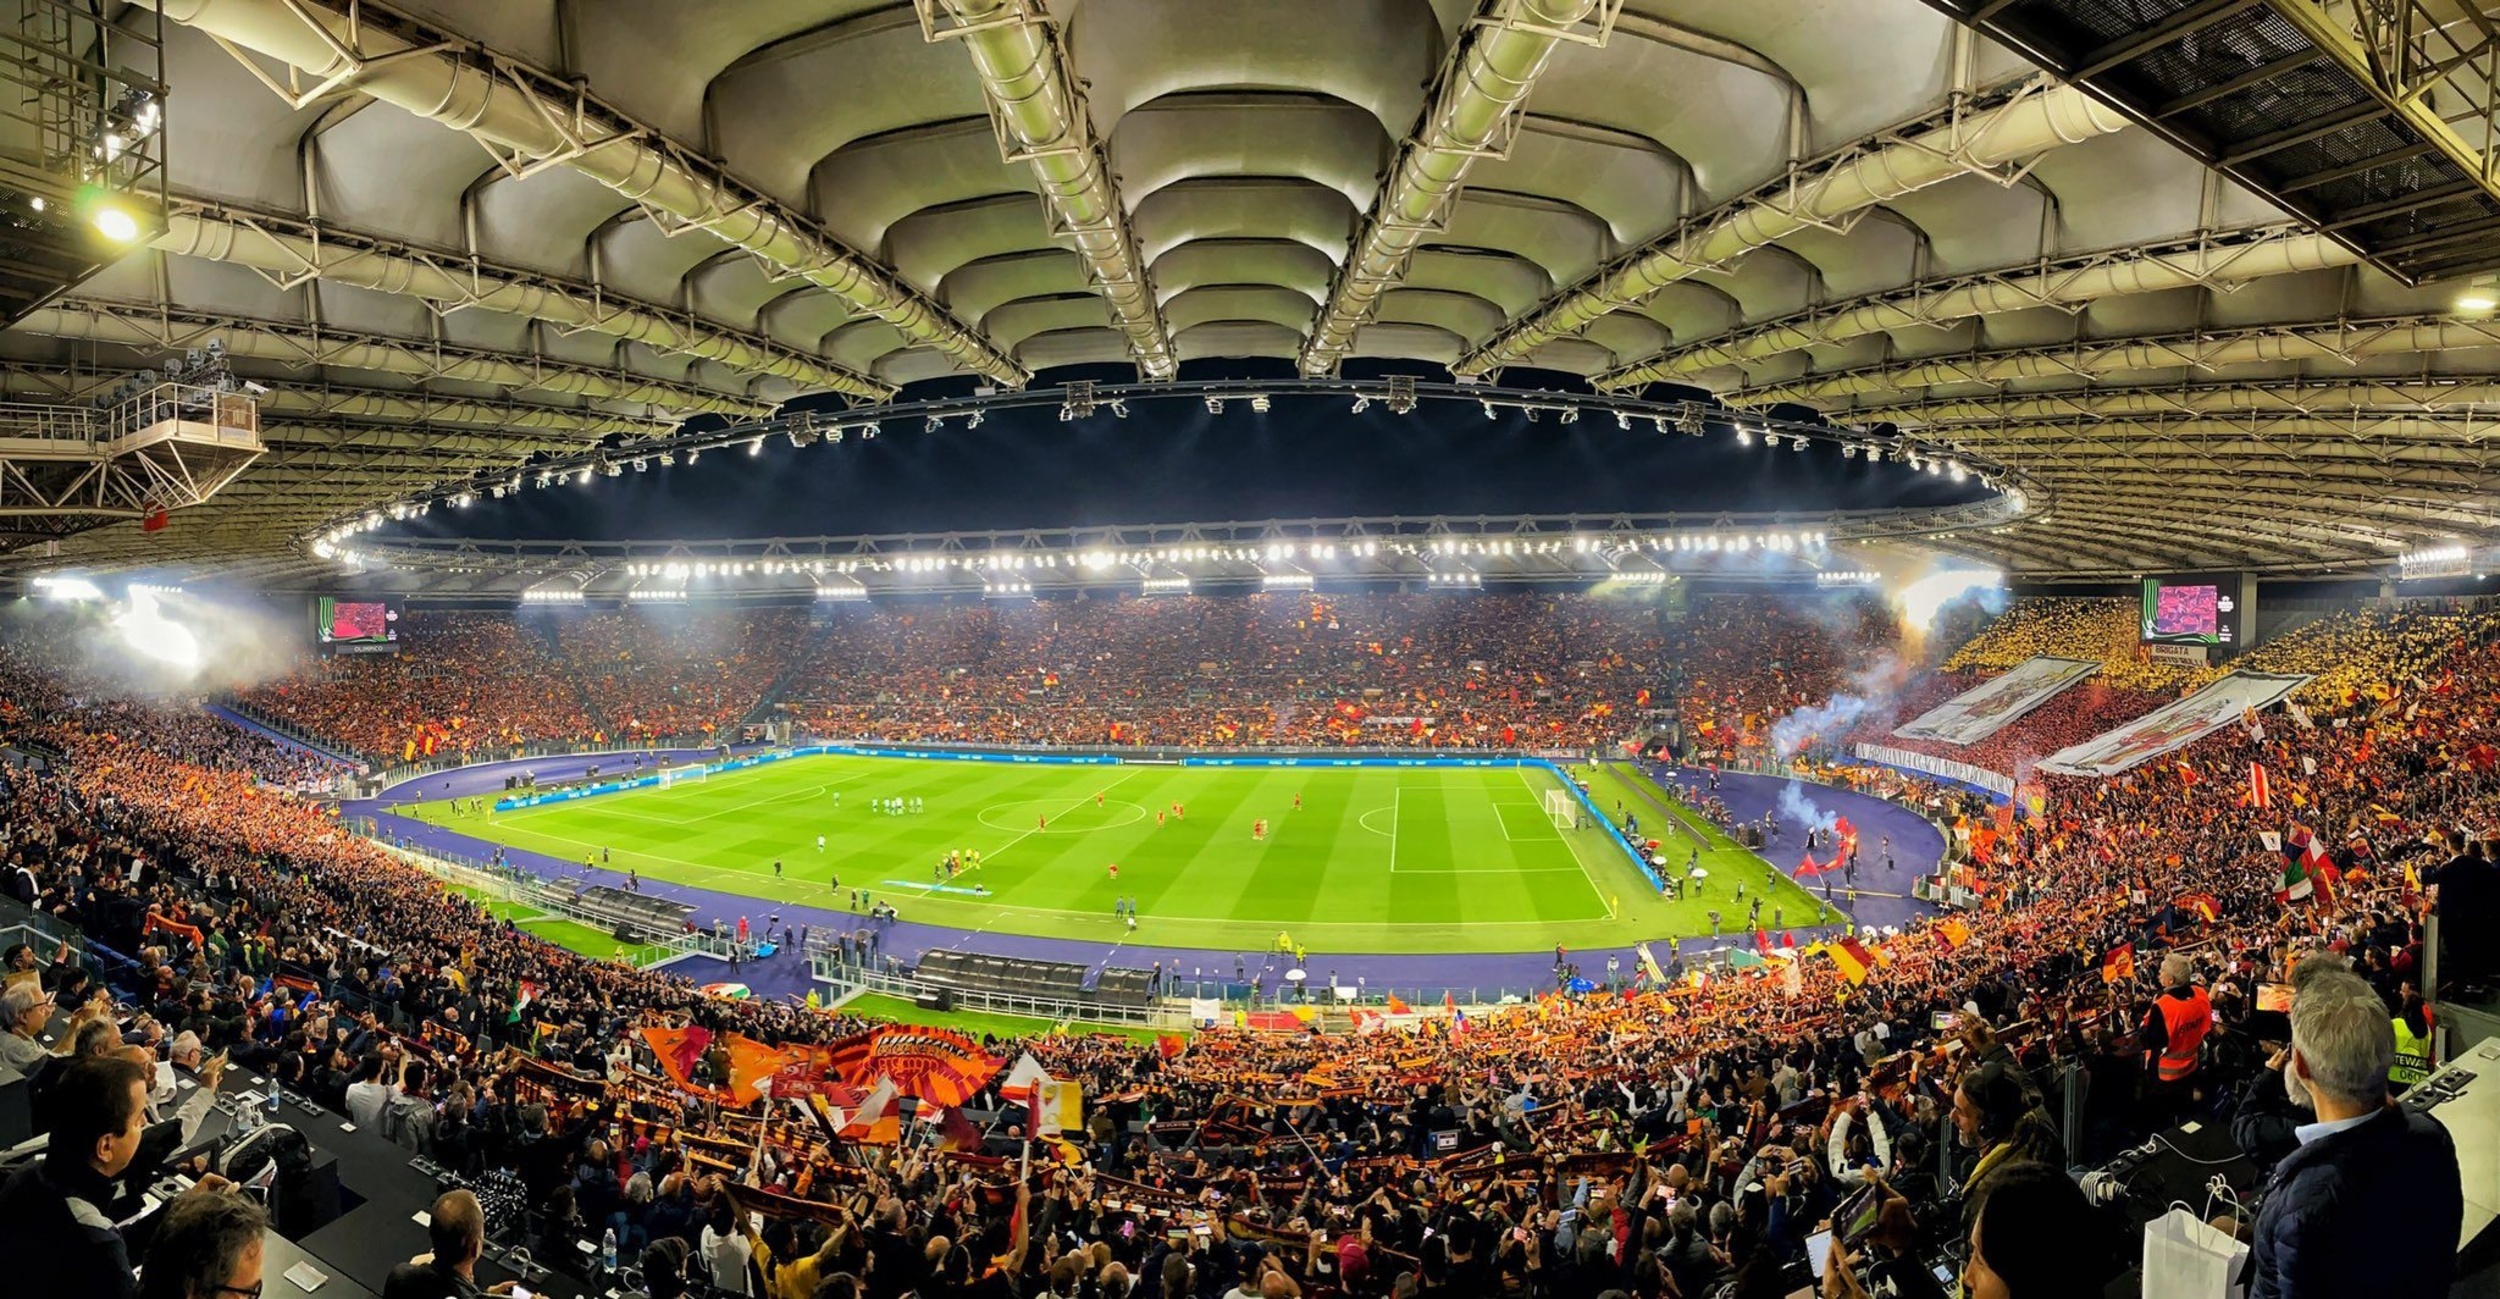 <p>Move over, American football. The crowds of 70,000 that cram into Stadio Olimpico make the Superbowl sound like a high school game. Even people who find soccer boring can't help but be blown away by the noise. </p><p><a href='https://www.msn.com/en-us/community/channel/vid-cj9pqbr0vn9in2b6ddcd8sfgpfq6x6utp44fssrv6mc2gtybw0us'>Follow us on MSN to see more of our exclusive lifestyle content.</a></p>